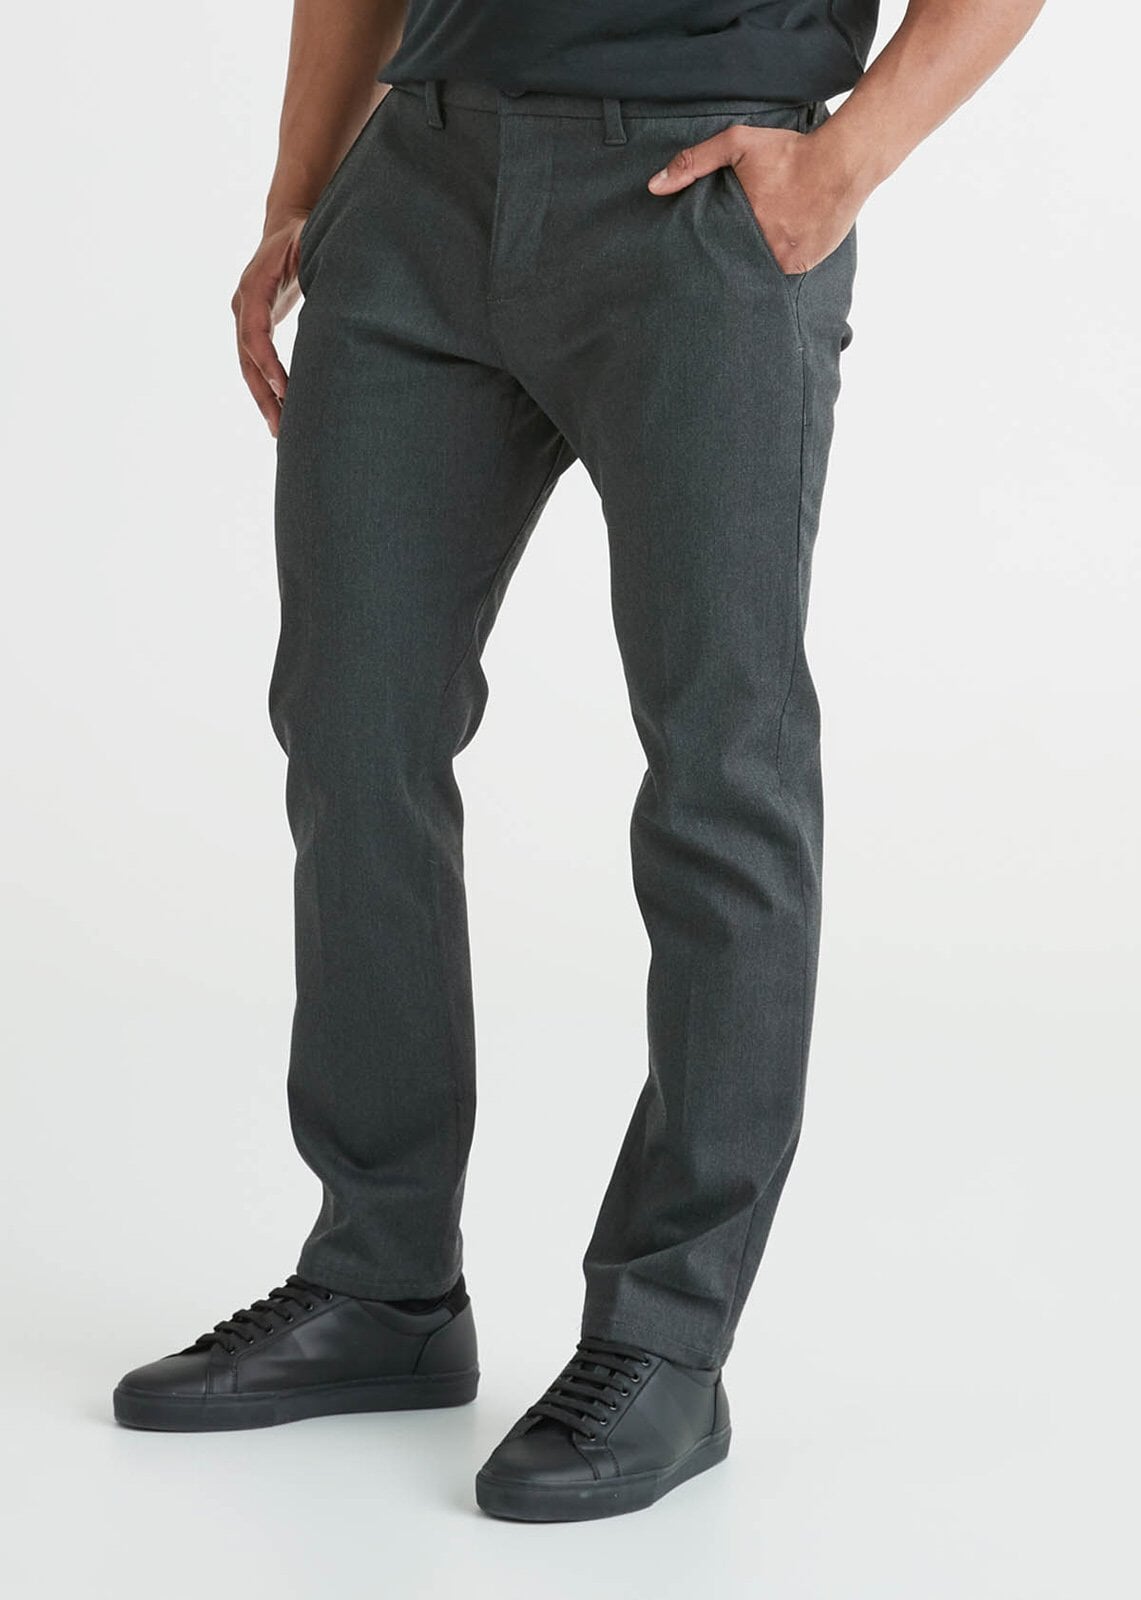 Men's Charcoal Relaxed Fit Stretch Dress Pant Front